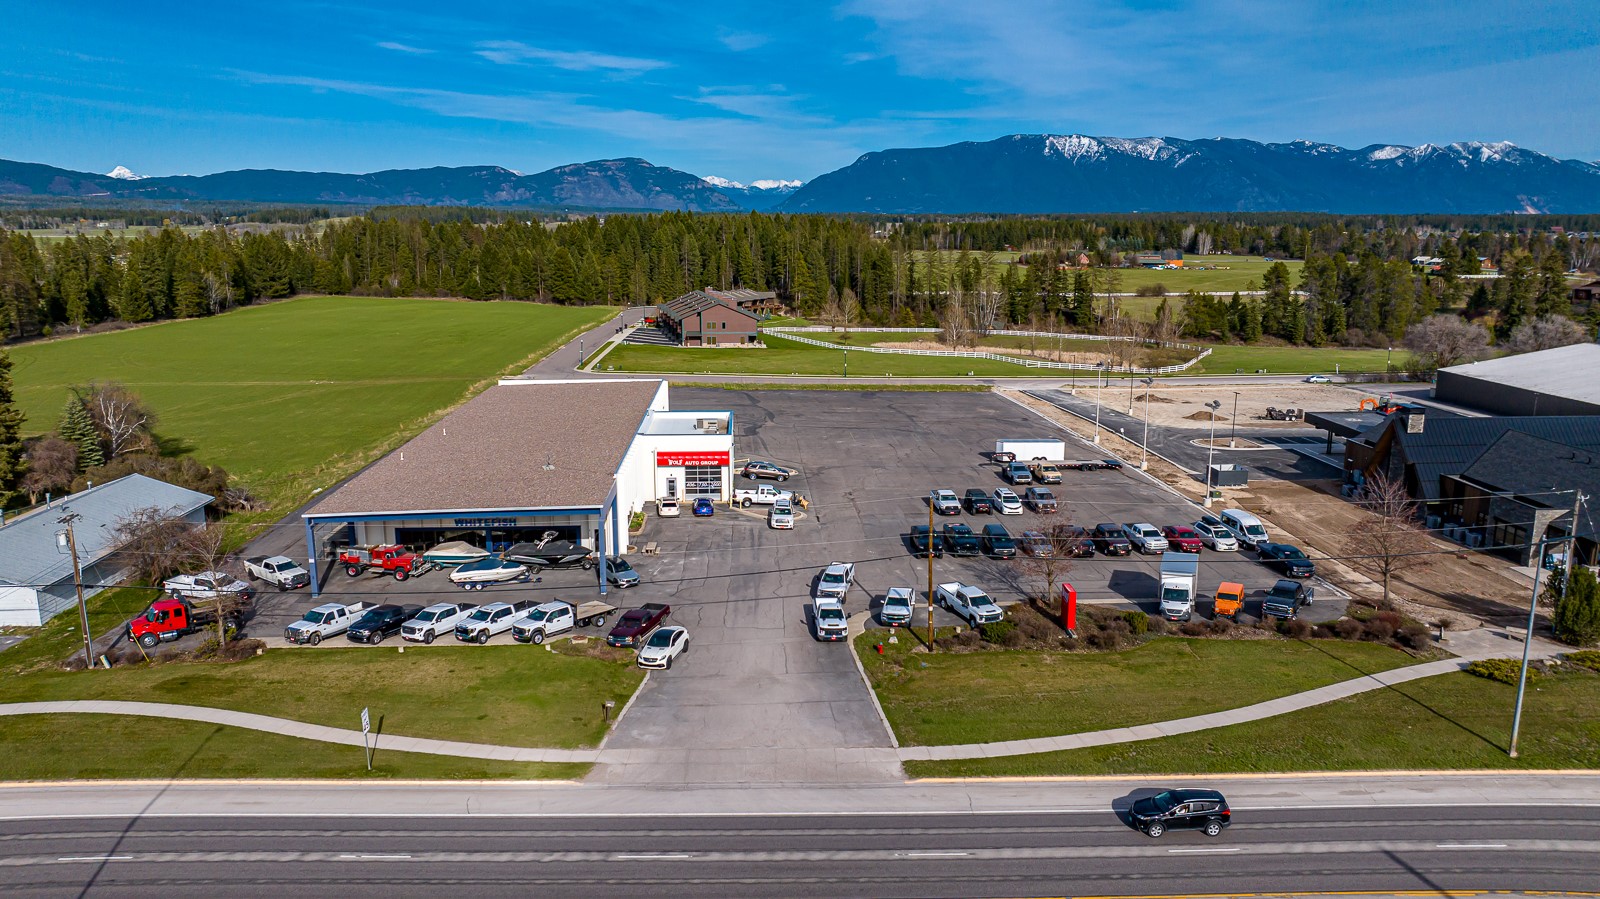 Exceptional commercial opportunity strategically poised along the bustling Highway 93 corridor leading into Whitefish! This property offers unmatched exposure and visibility for businesses seeking to thrive in a high-traffic location with over an impressive 25,000 average daily traffic count. Situated on a generous 3-acre parcel, this property was tailored to meet the needs of various commercial enterprises. Offering a total of 6 offices, 10 showroom offices, large service center and shop, and 2 sets of public restrooms, provides ample space to conduct business operations with utmost efficiency ensuring the convenience and comfort of clientele & staff alike. Well maintained, and ideally situated just minutes from vibrant Downtown Whitefish providing easy access to fantastic dining options, amenities, & recreational activities the area has to offer. Don’t miss this extraordinary opportunity to establish your presence in one of Montana’s sought after commercial corridors. Call Sean Averill (406)253-3010 or your real estate professional for more information.